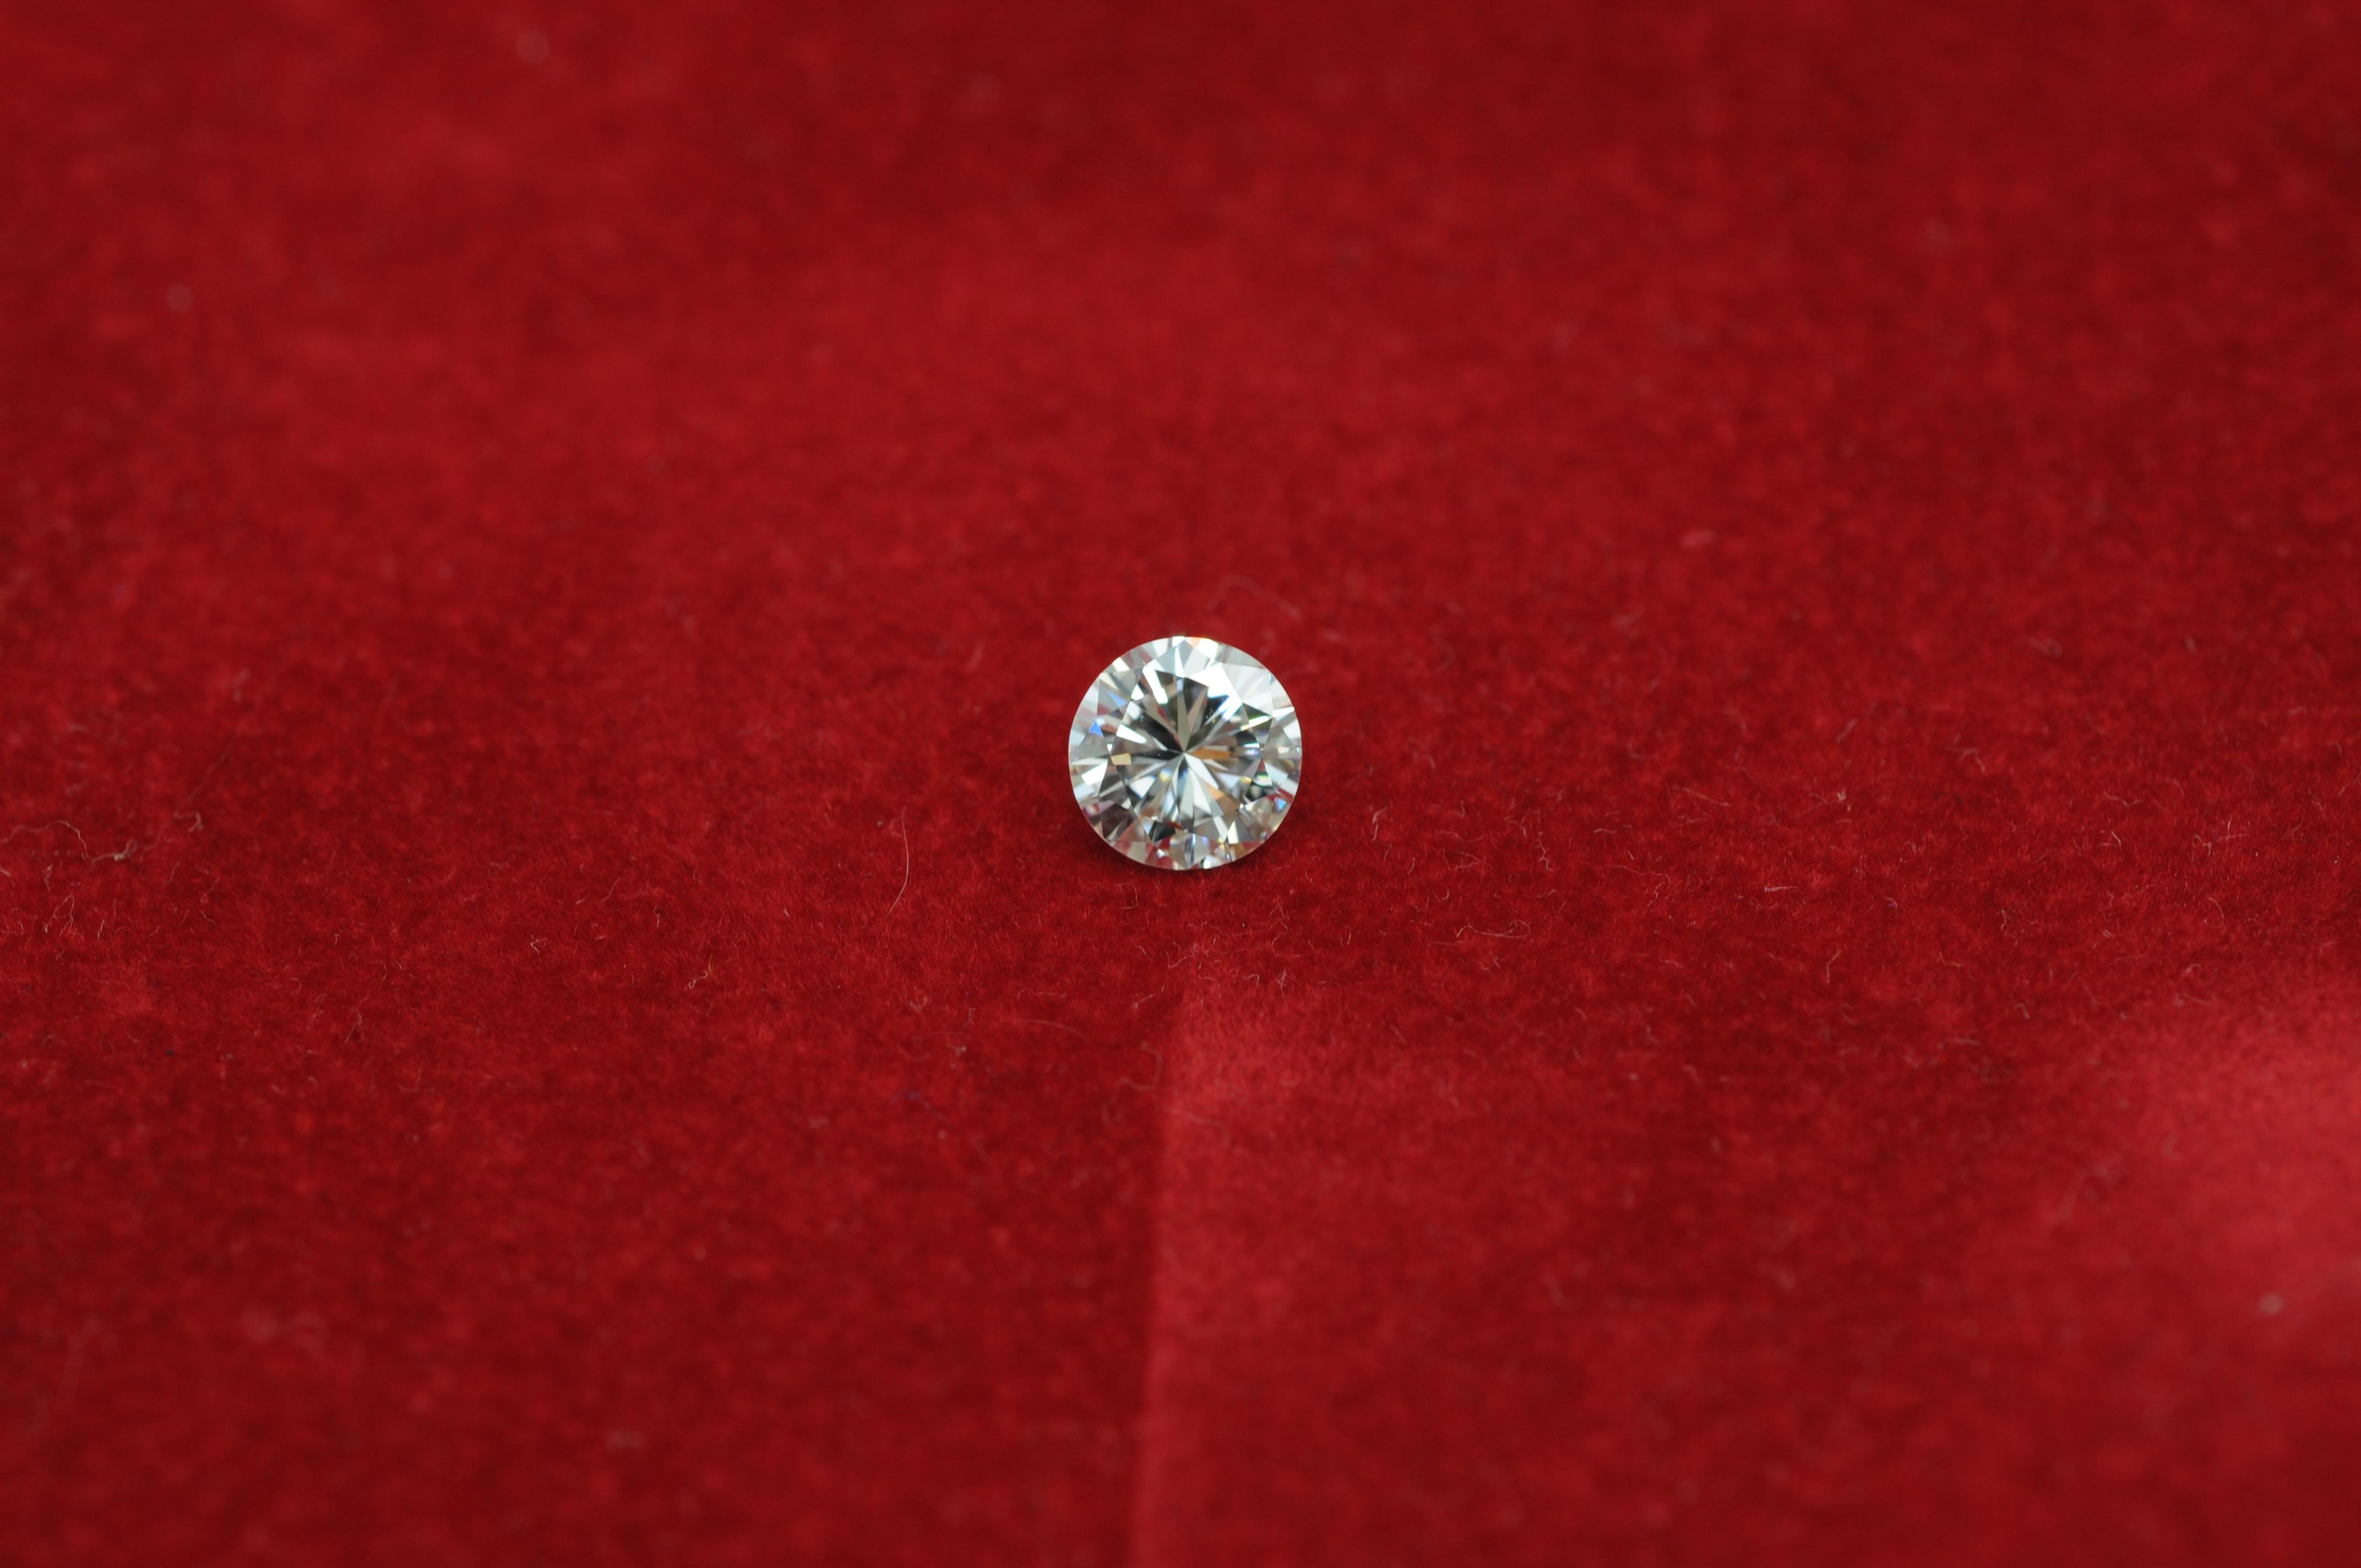  Diamond clarity:(IF) internally flawless color: top wesselton 1.06ct For Sale 10